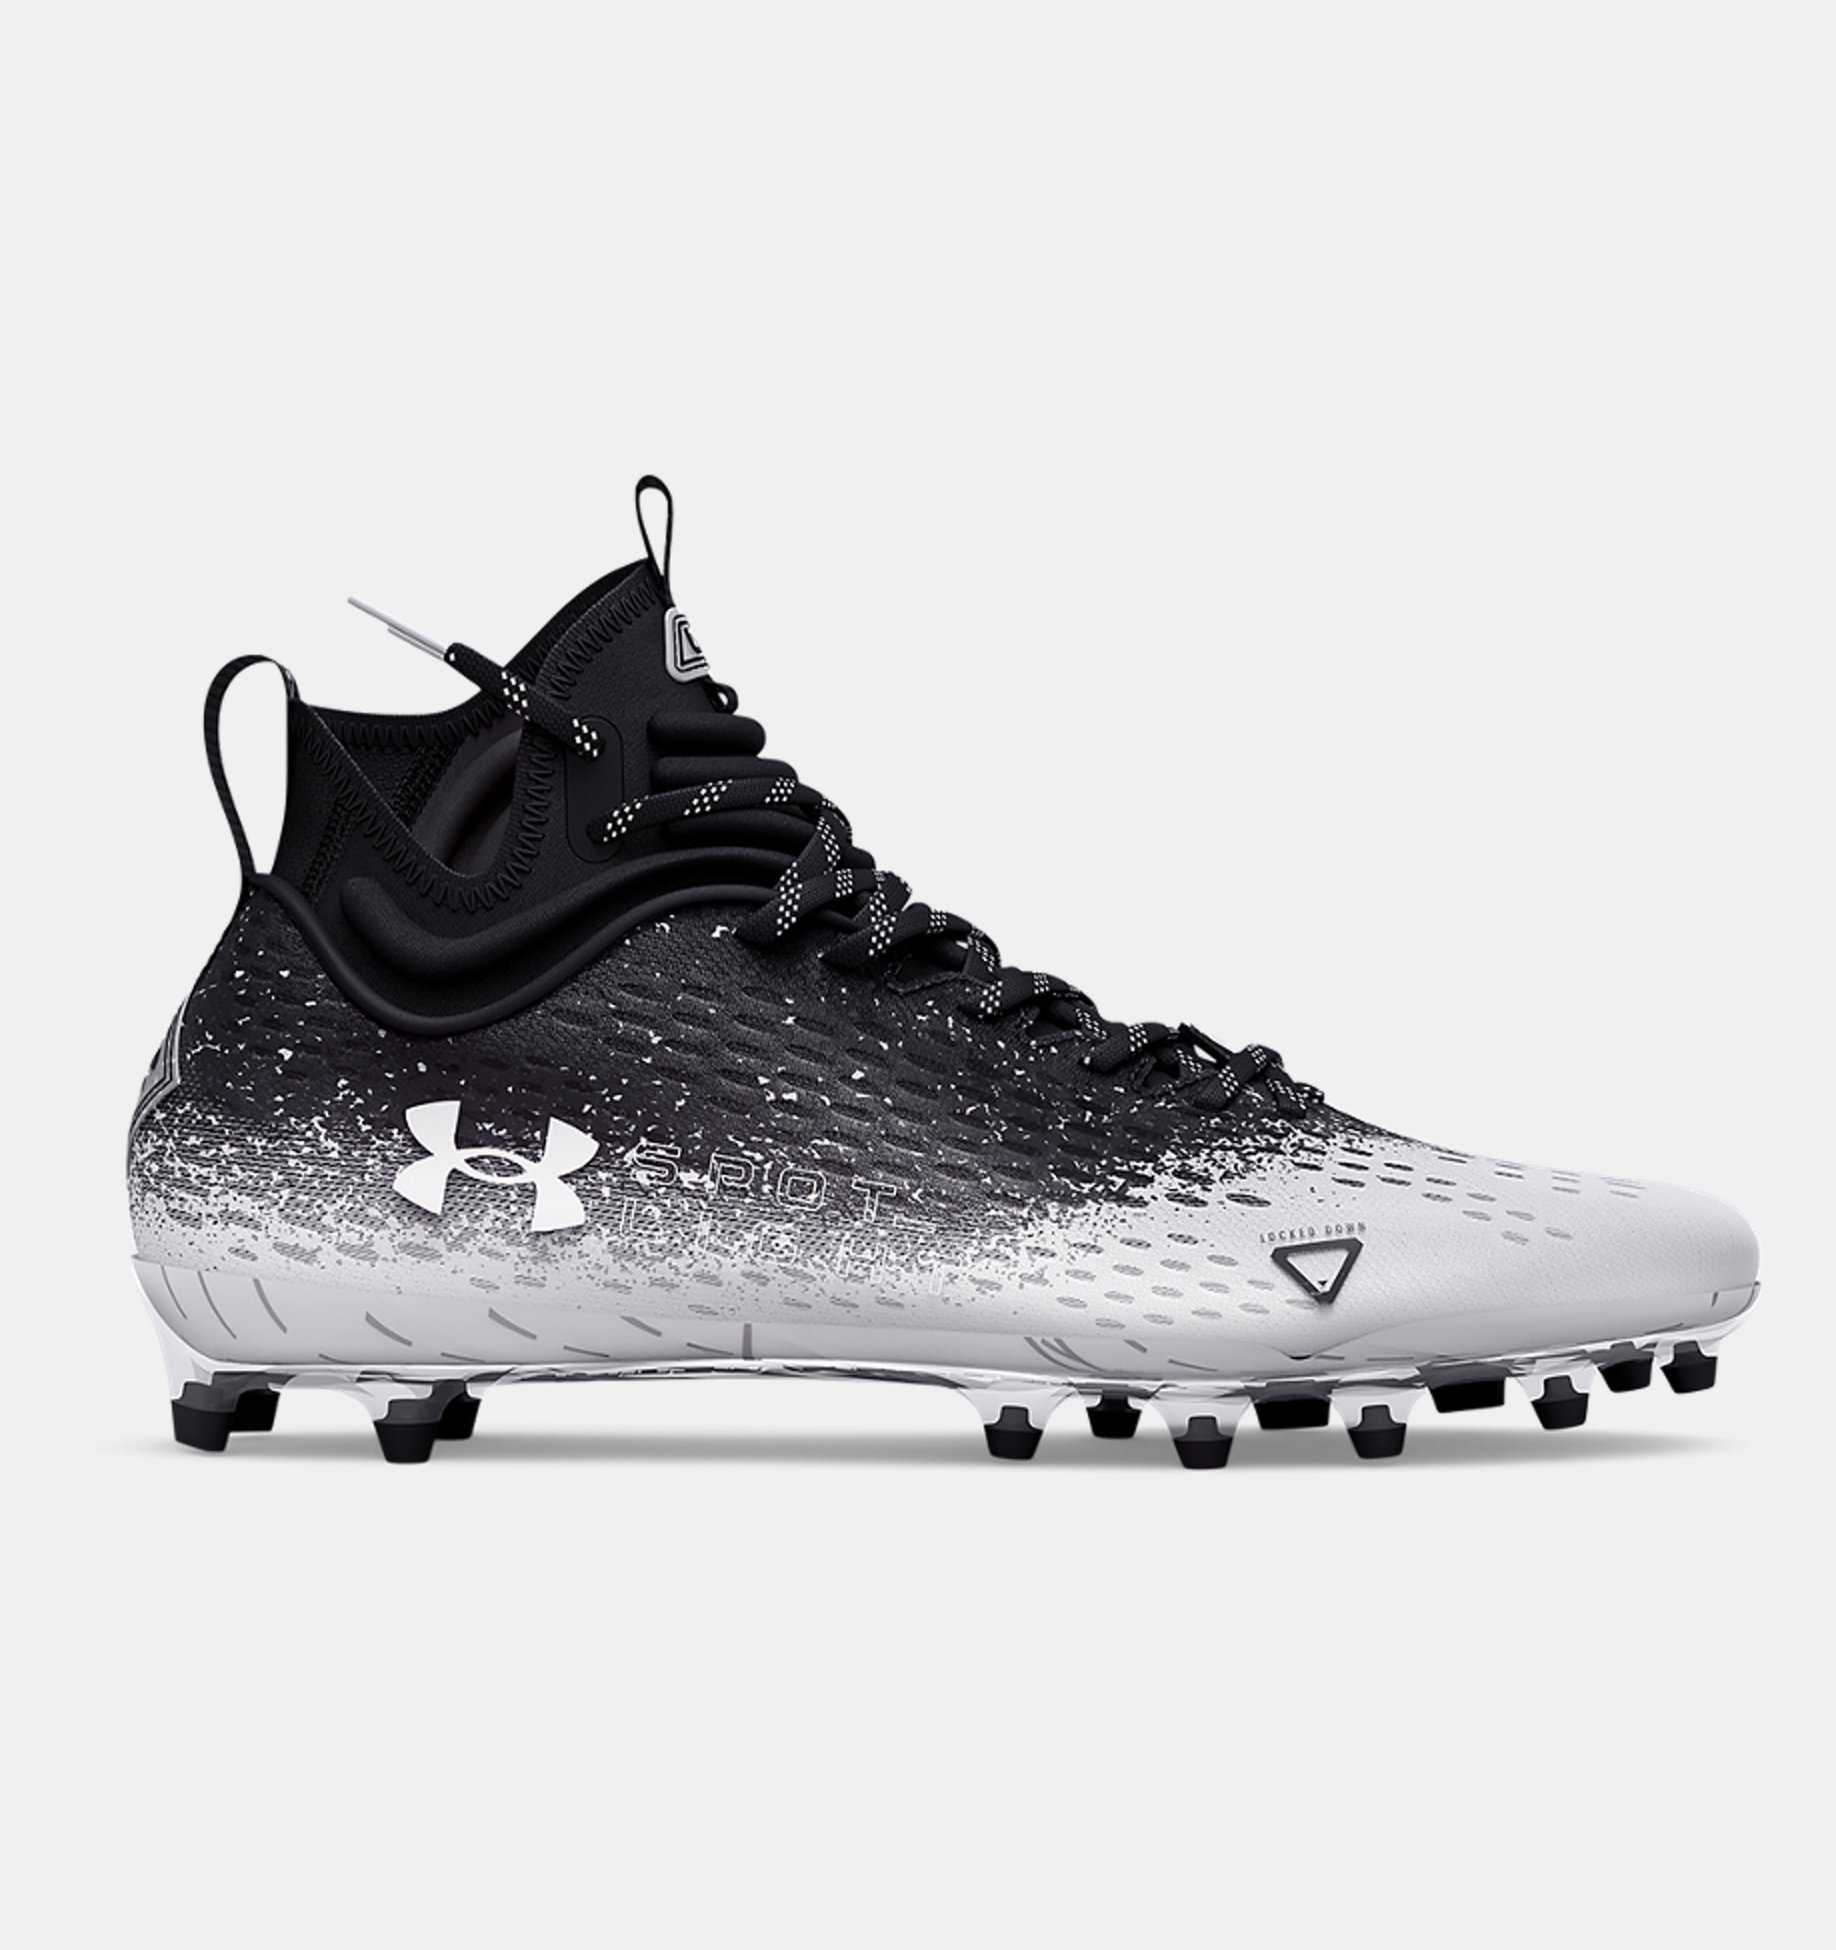 Under Armour Cleats Black/White Used Multiple Sizes 